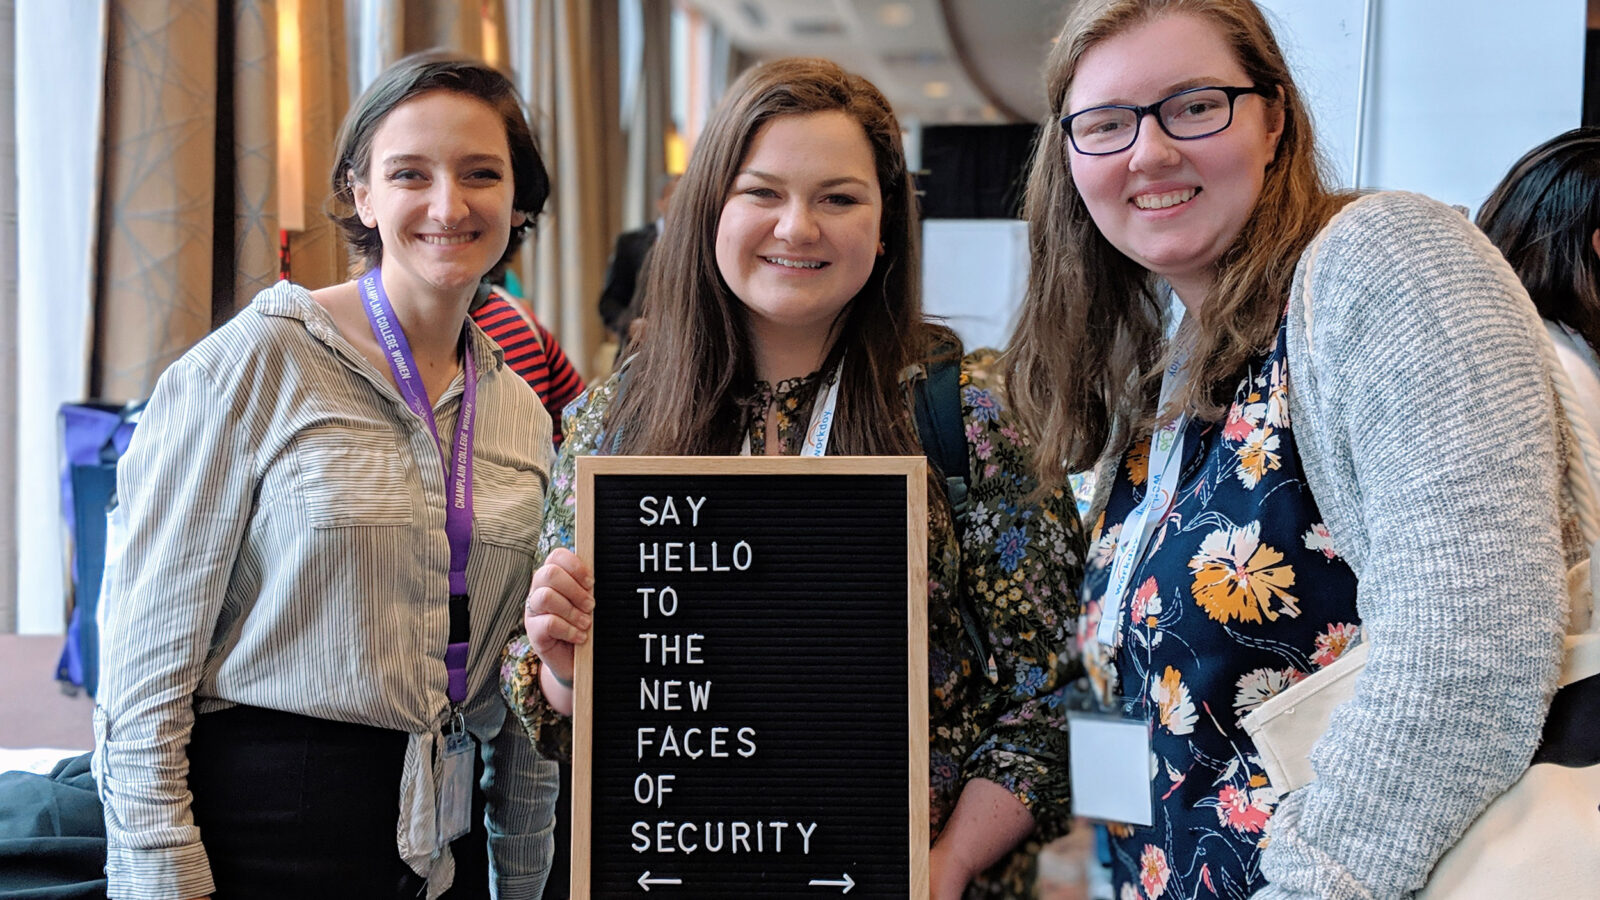 three female presenting students holding a sign that says "say hello to the new faces of security"